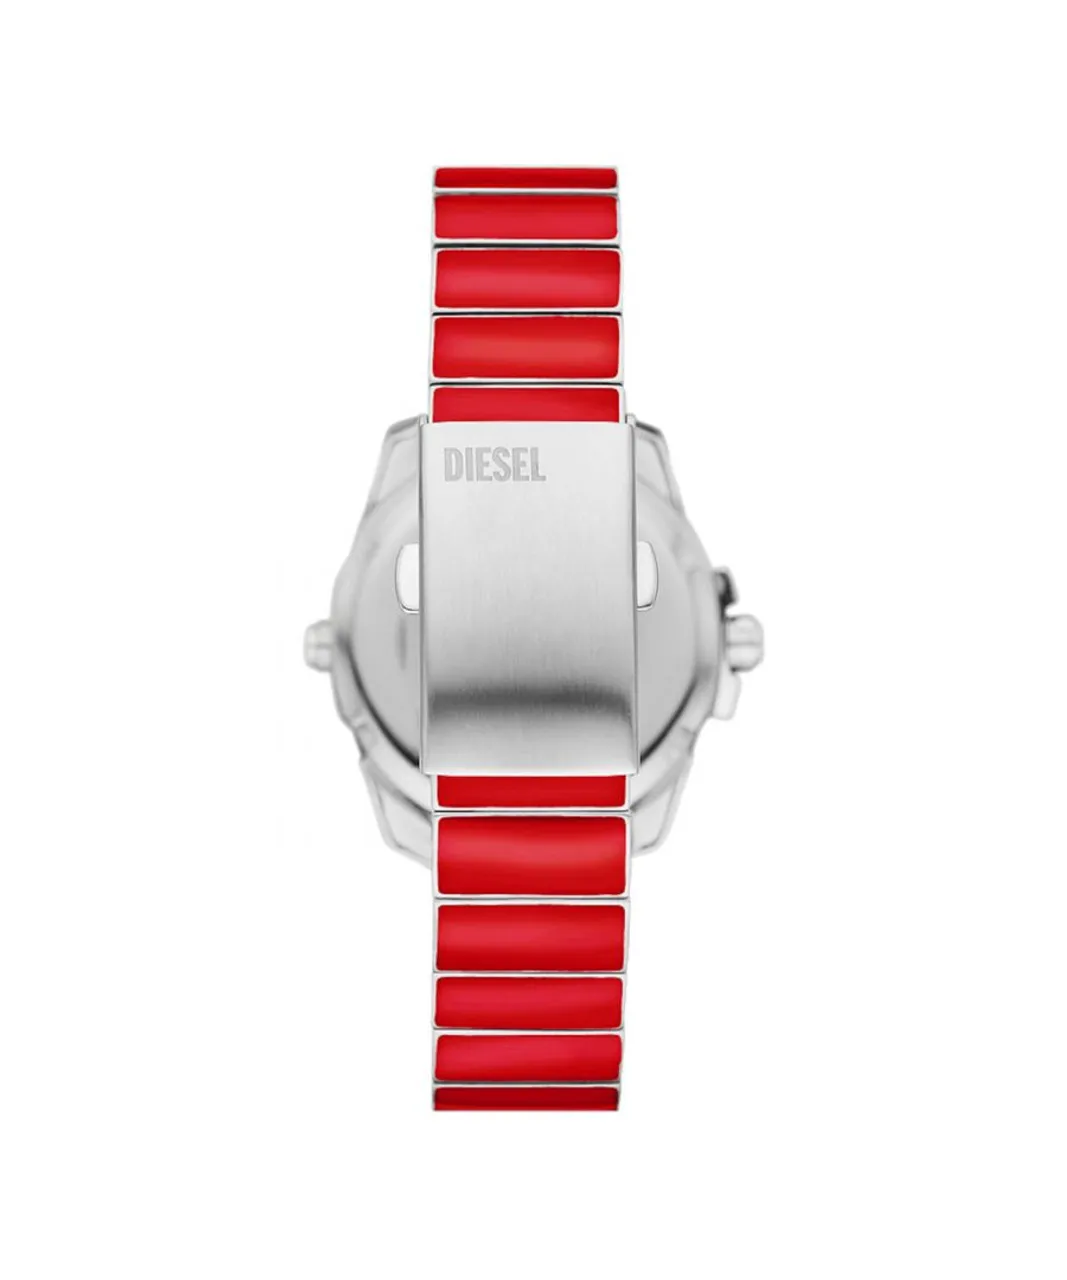 Diesel Baby Chief Mens Red Watch DZ2192 Stainless Steel (archived) - One Size